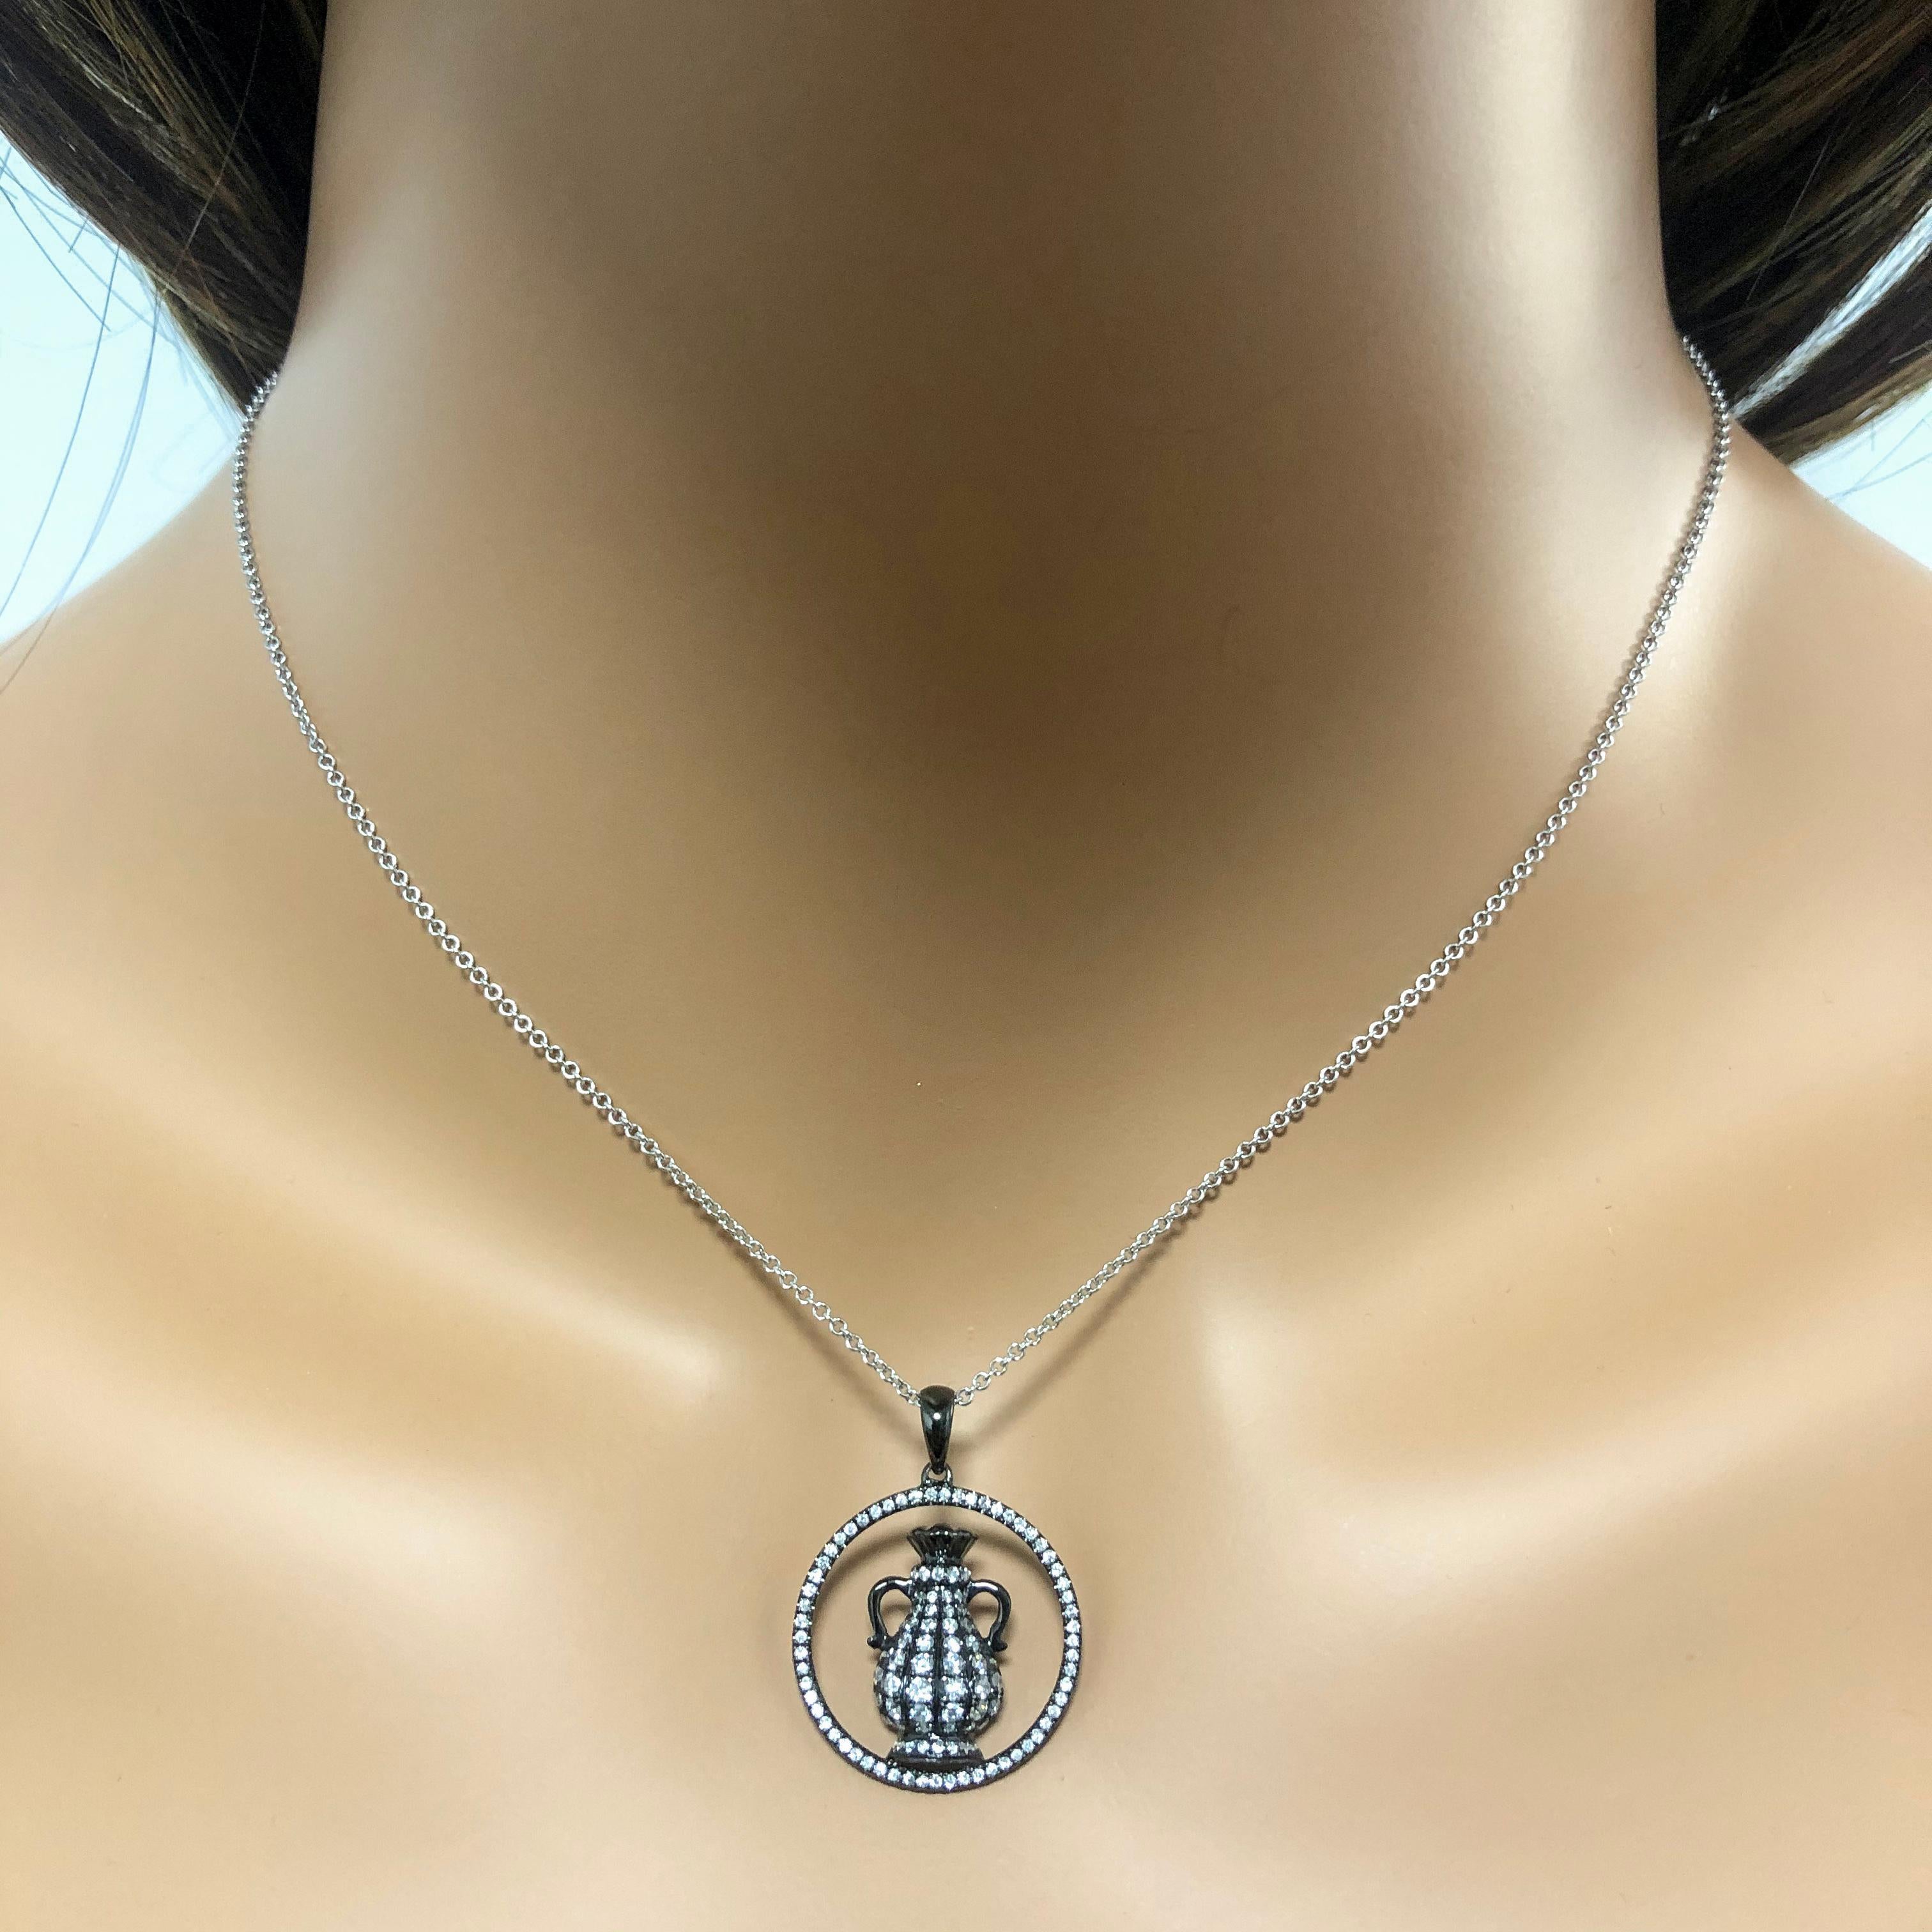 An elegant Aquarius zodiac necklace set with sparkling round diamonds weighing 0.56 carats total. Made with 18k gold, plated with black rhodium. Comes with 16 inch white gold chain. This is a perfect birthday gift for people who celebrate birthdays